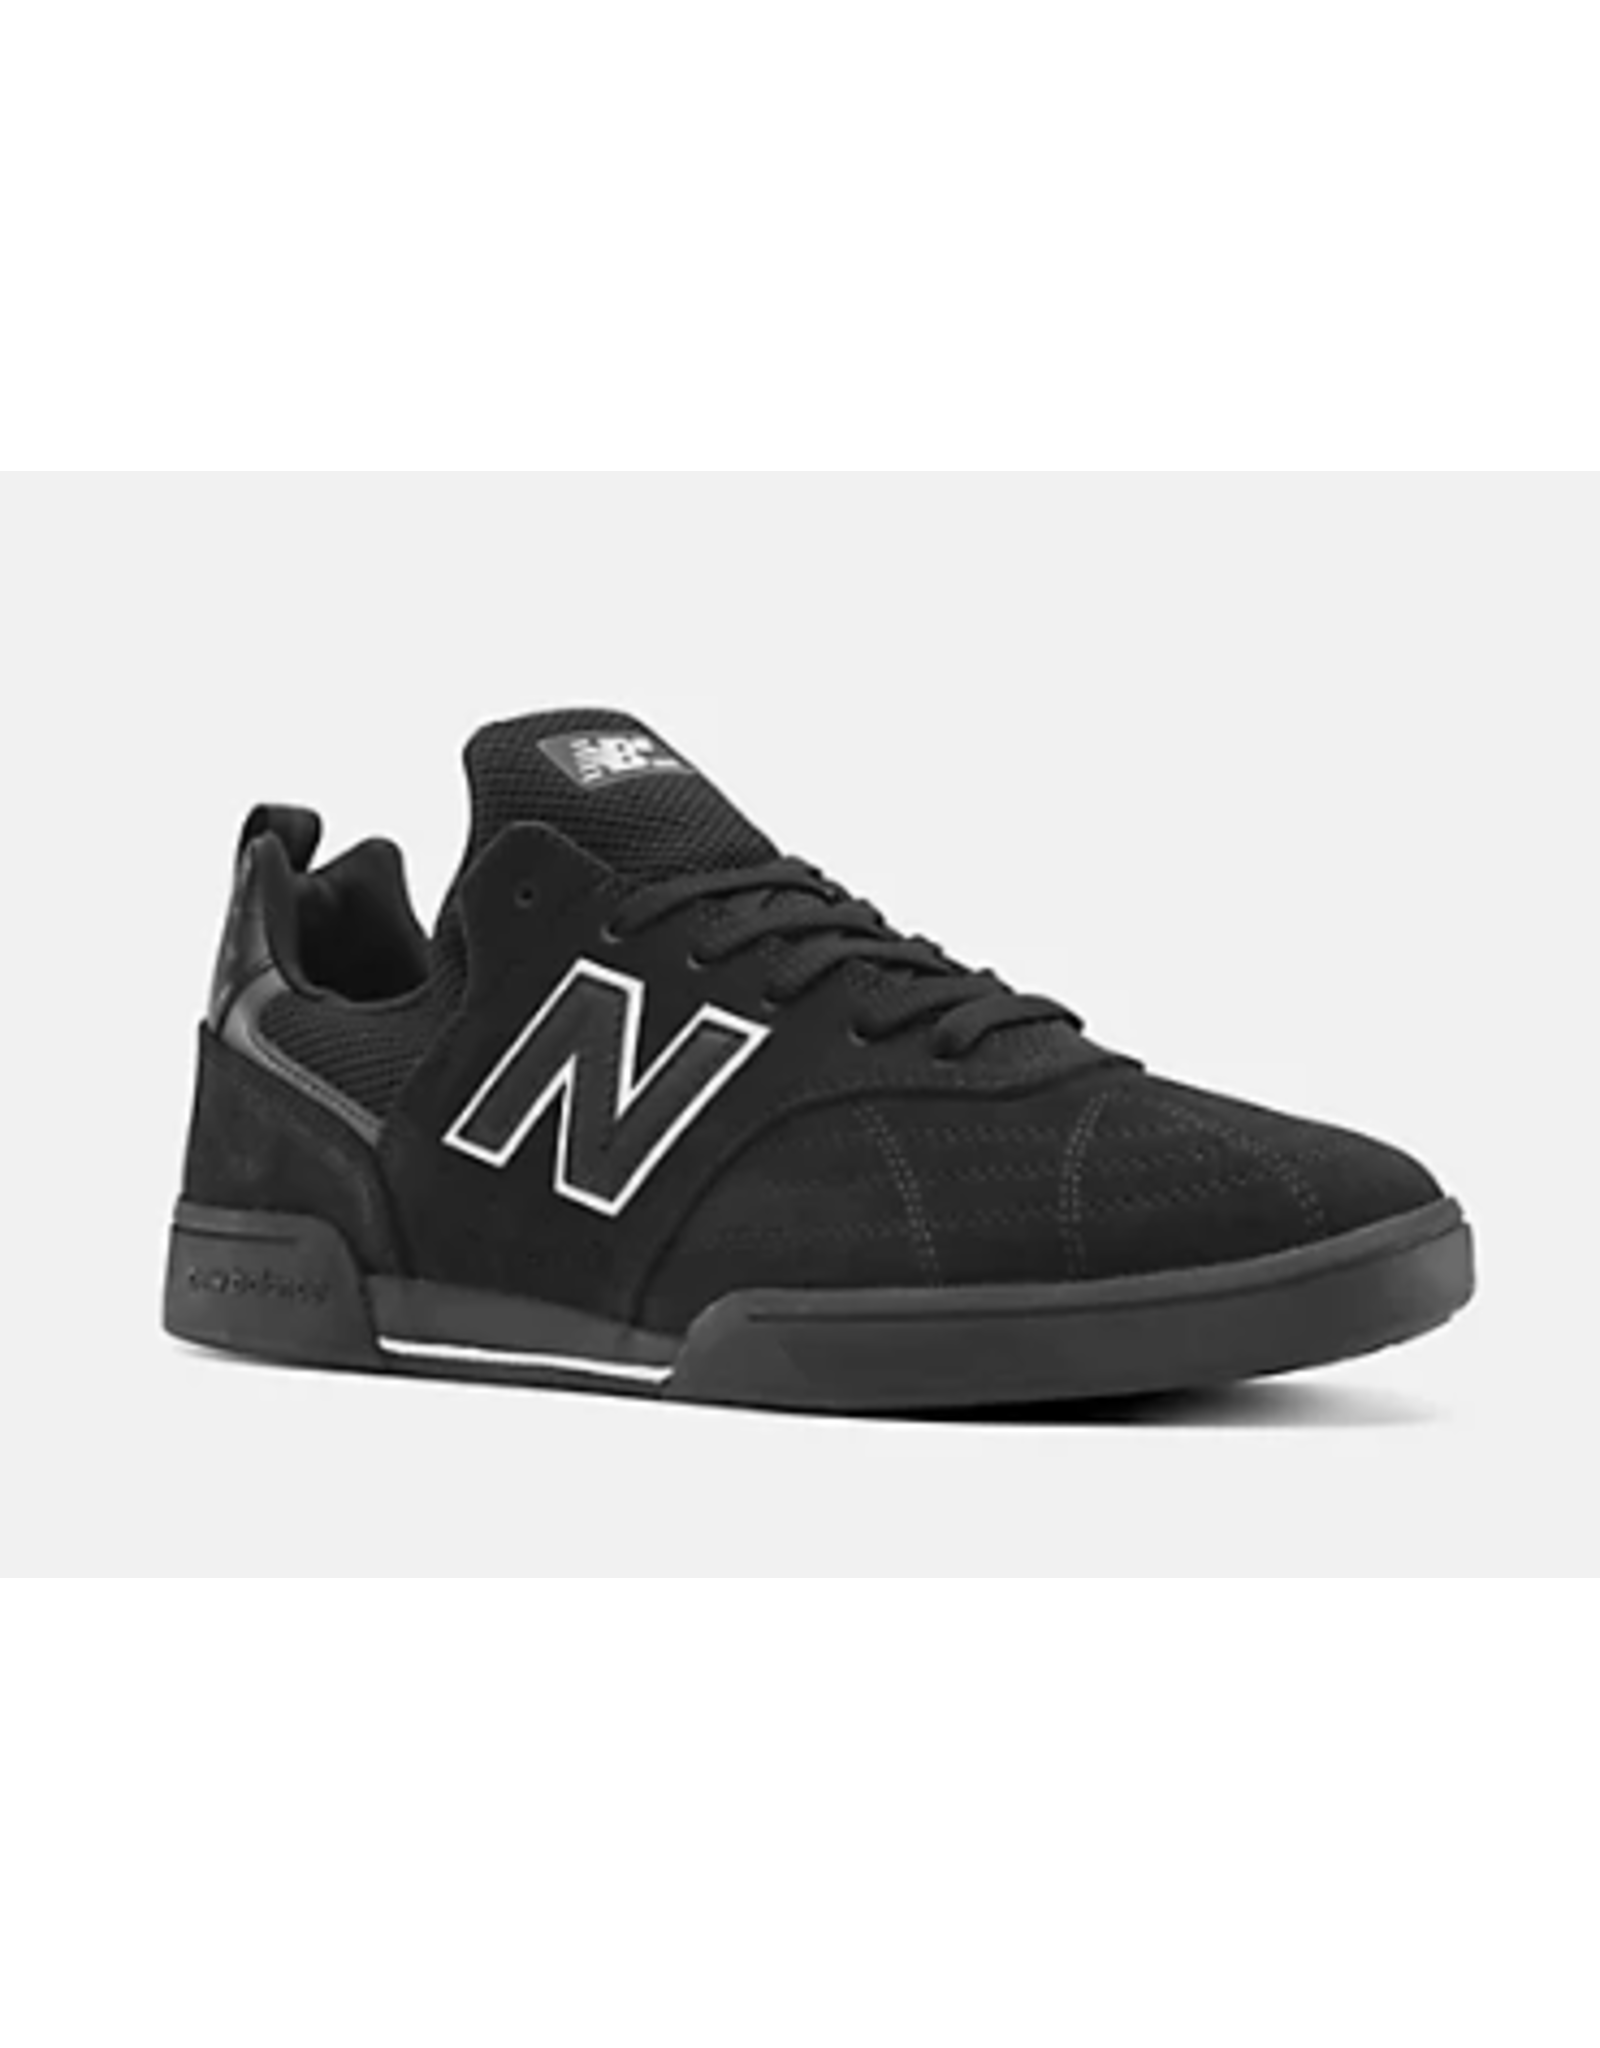 New Balance Men's Numeric 288 Sport Shoes Black with White